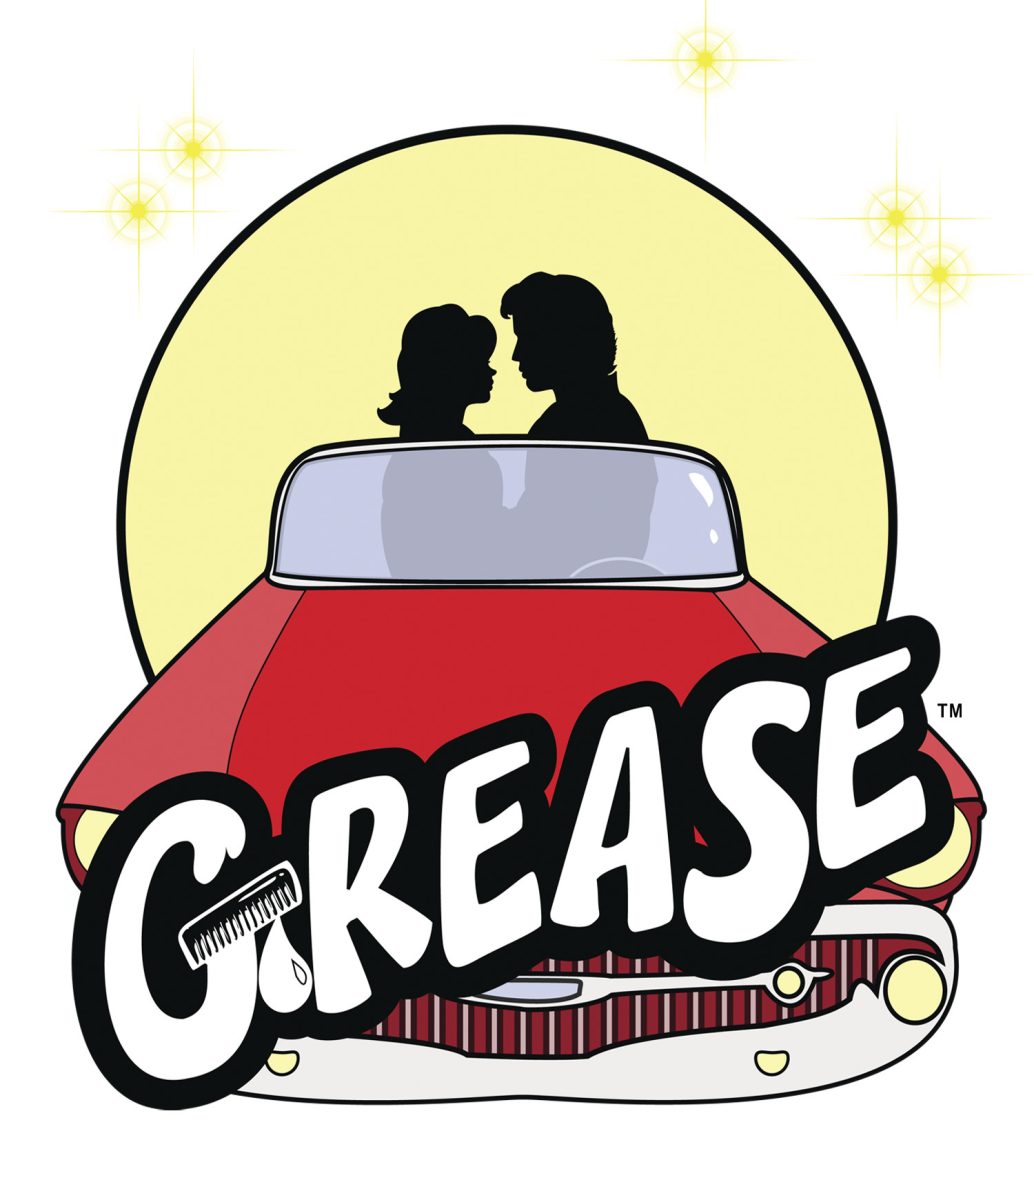 Grease Lightning Strikes: A Rockin Opening Night of the Iconic Musical.